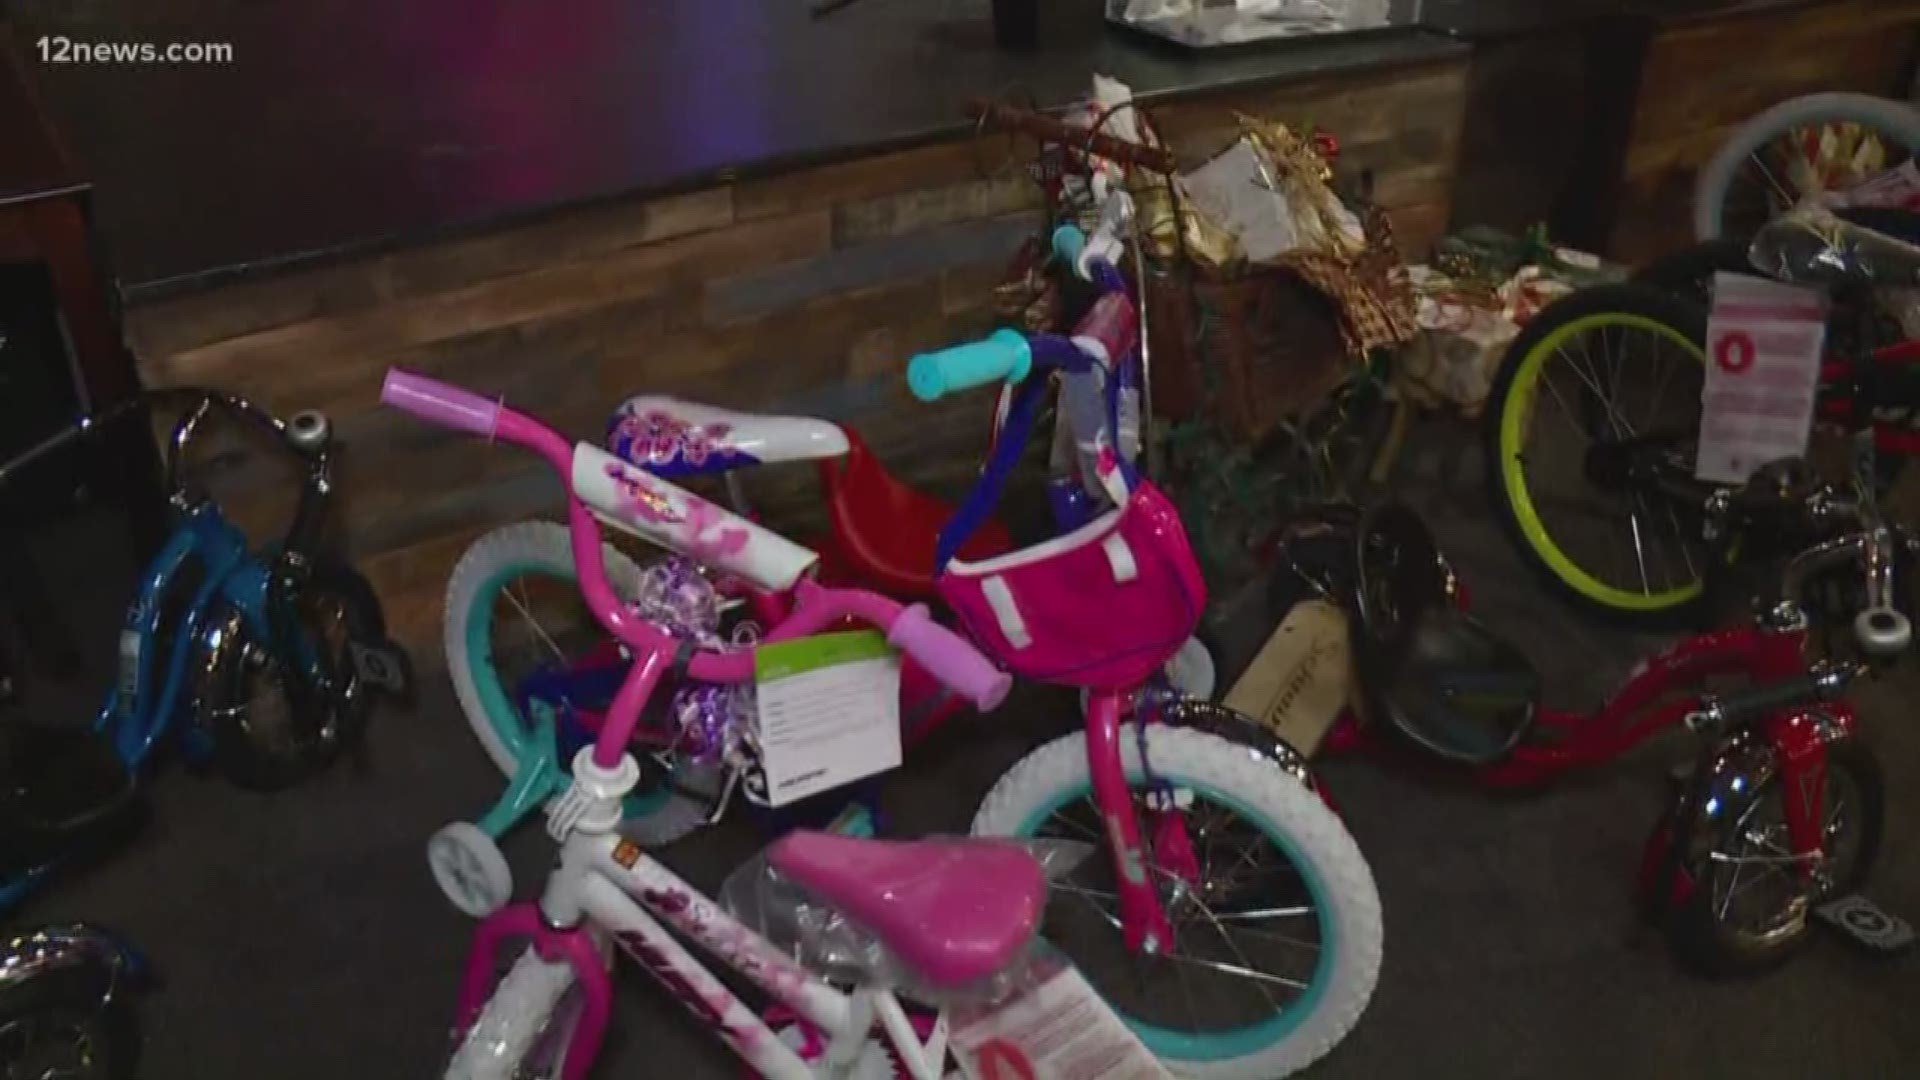 Fountain of Life church in Mesa is in need of bikes for its Christmas raffle Wednesday night. The church currently has 20 bikes to give out but is expecting 175 children.